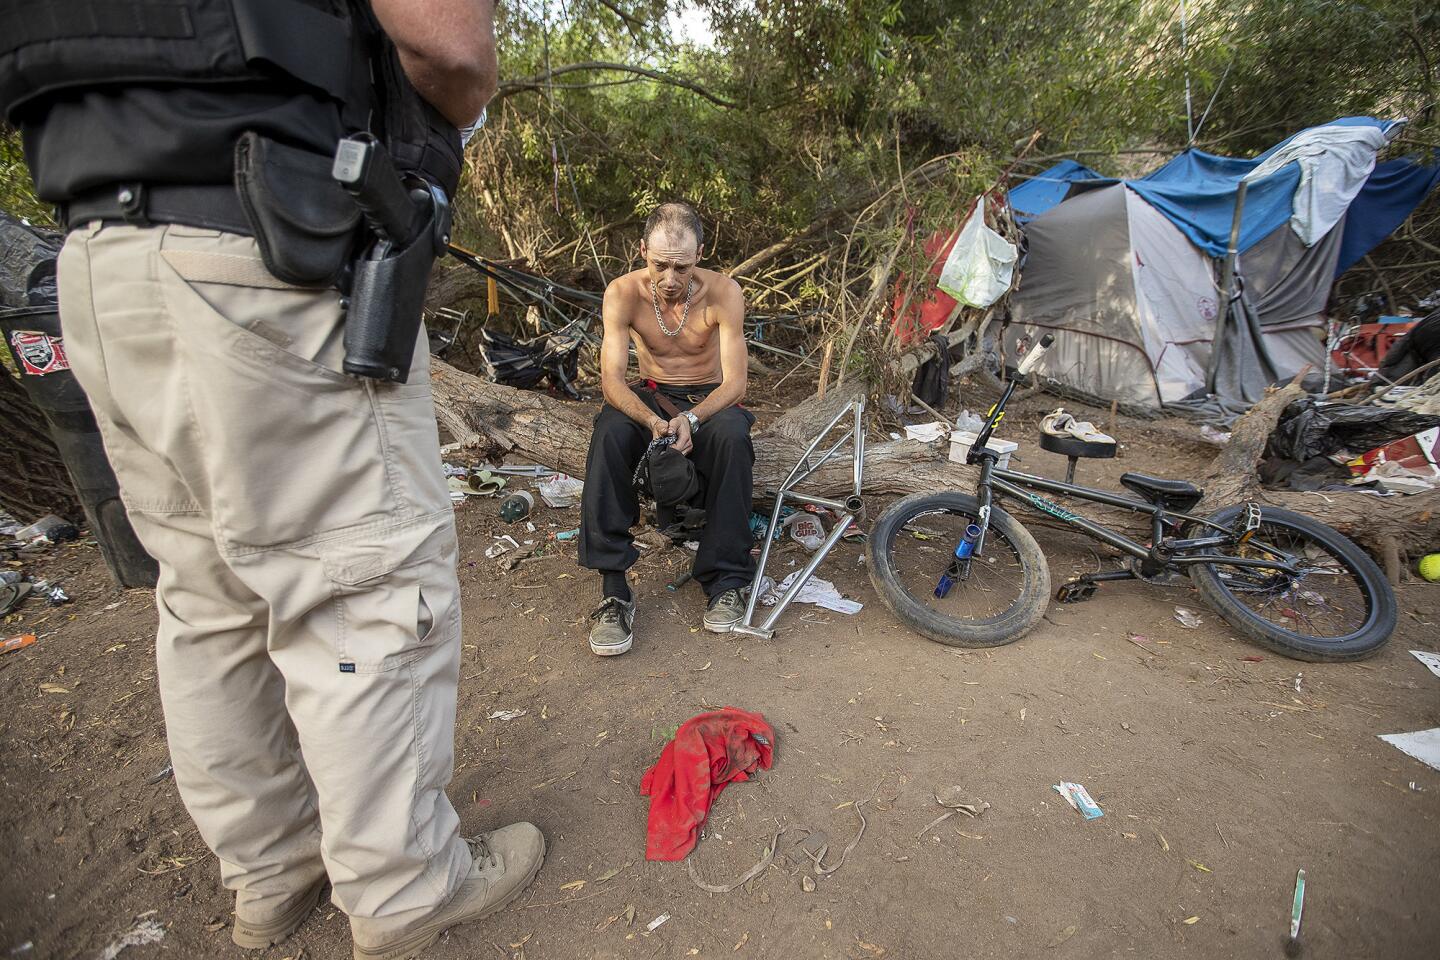 Officer Gabe Ricci with the Huntington Beach Homeless Task Force, left, talks with in Daniel Higgins near an encampement off of Ellis Ave in Huntington Beach on Wednesday, September 19.